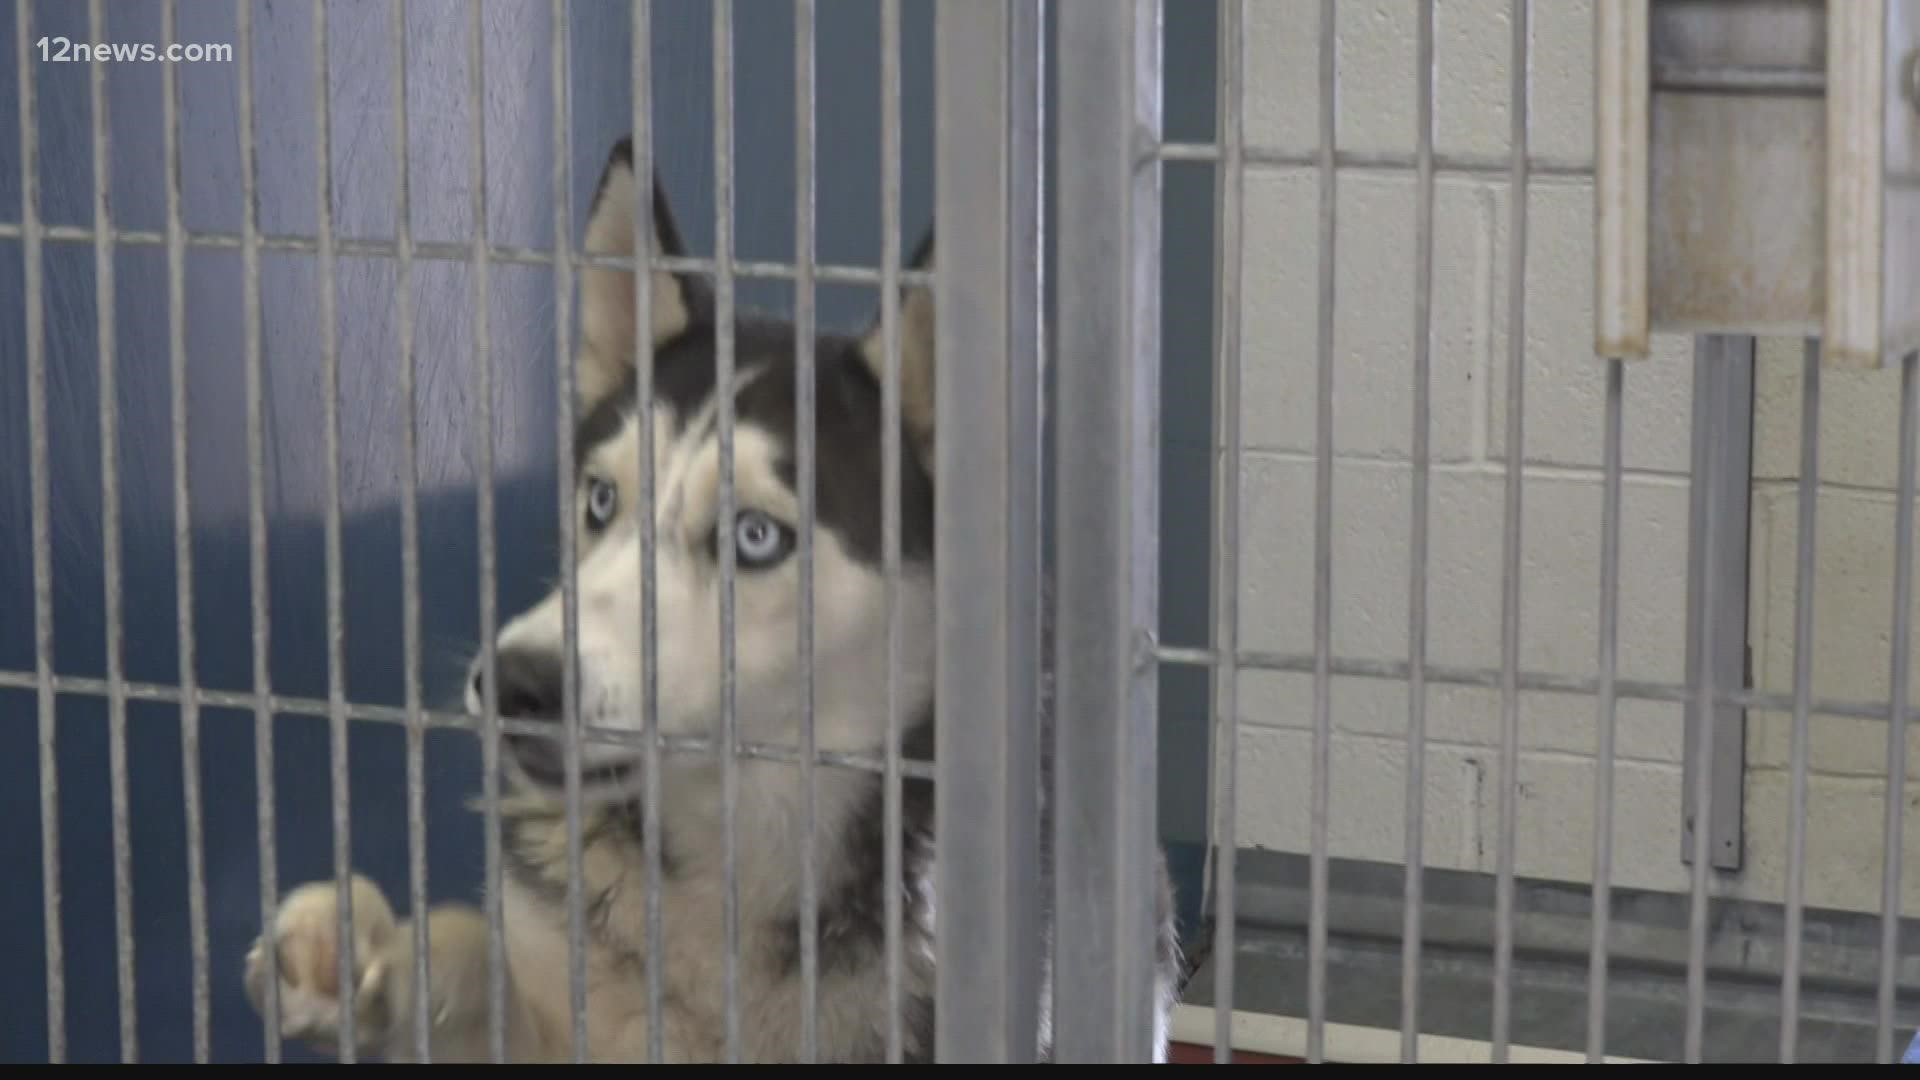 There's no more room for animals in Maricopa County shelters 